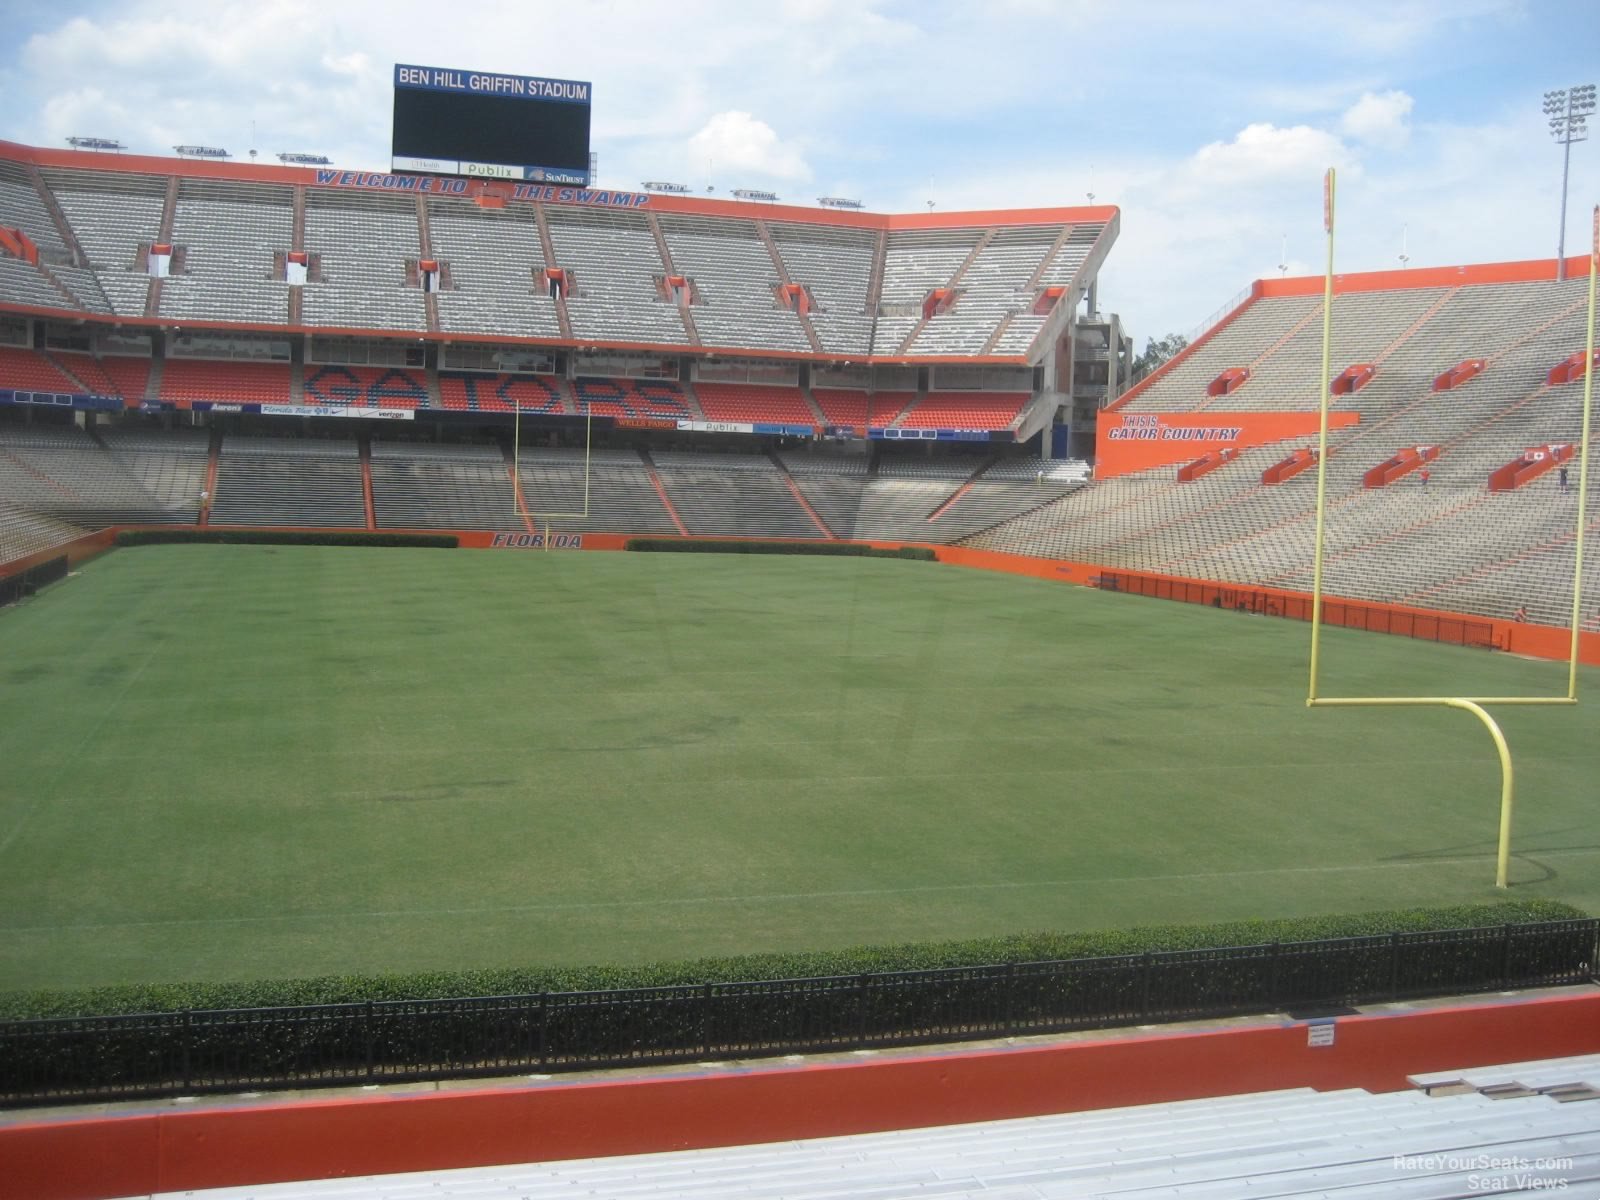 section f, row 23 seat view  - ben hill griffin stadium